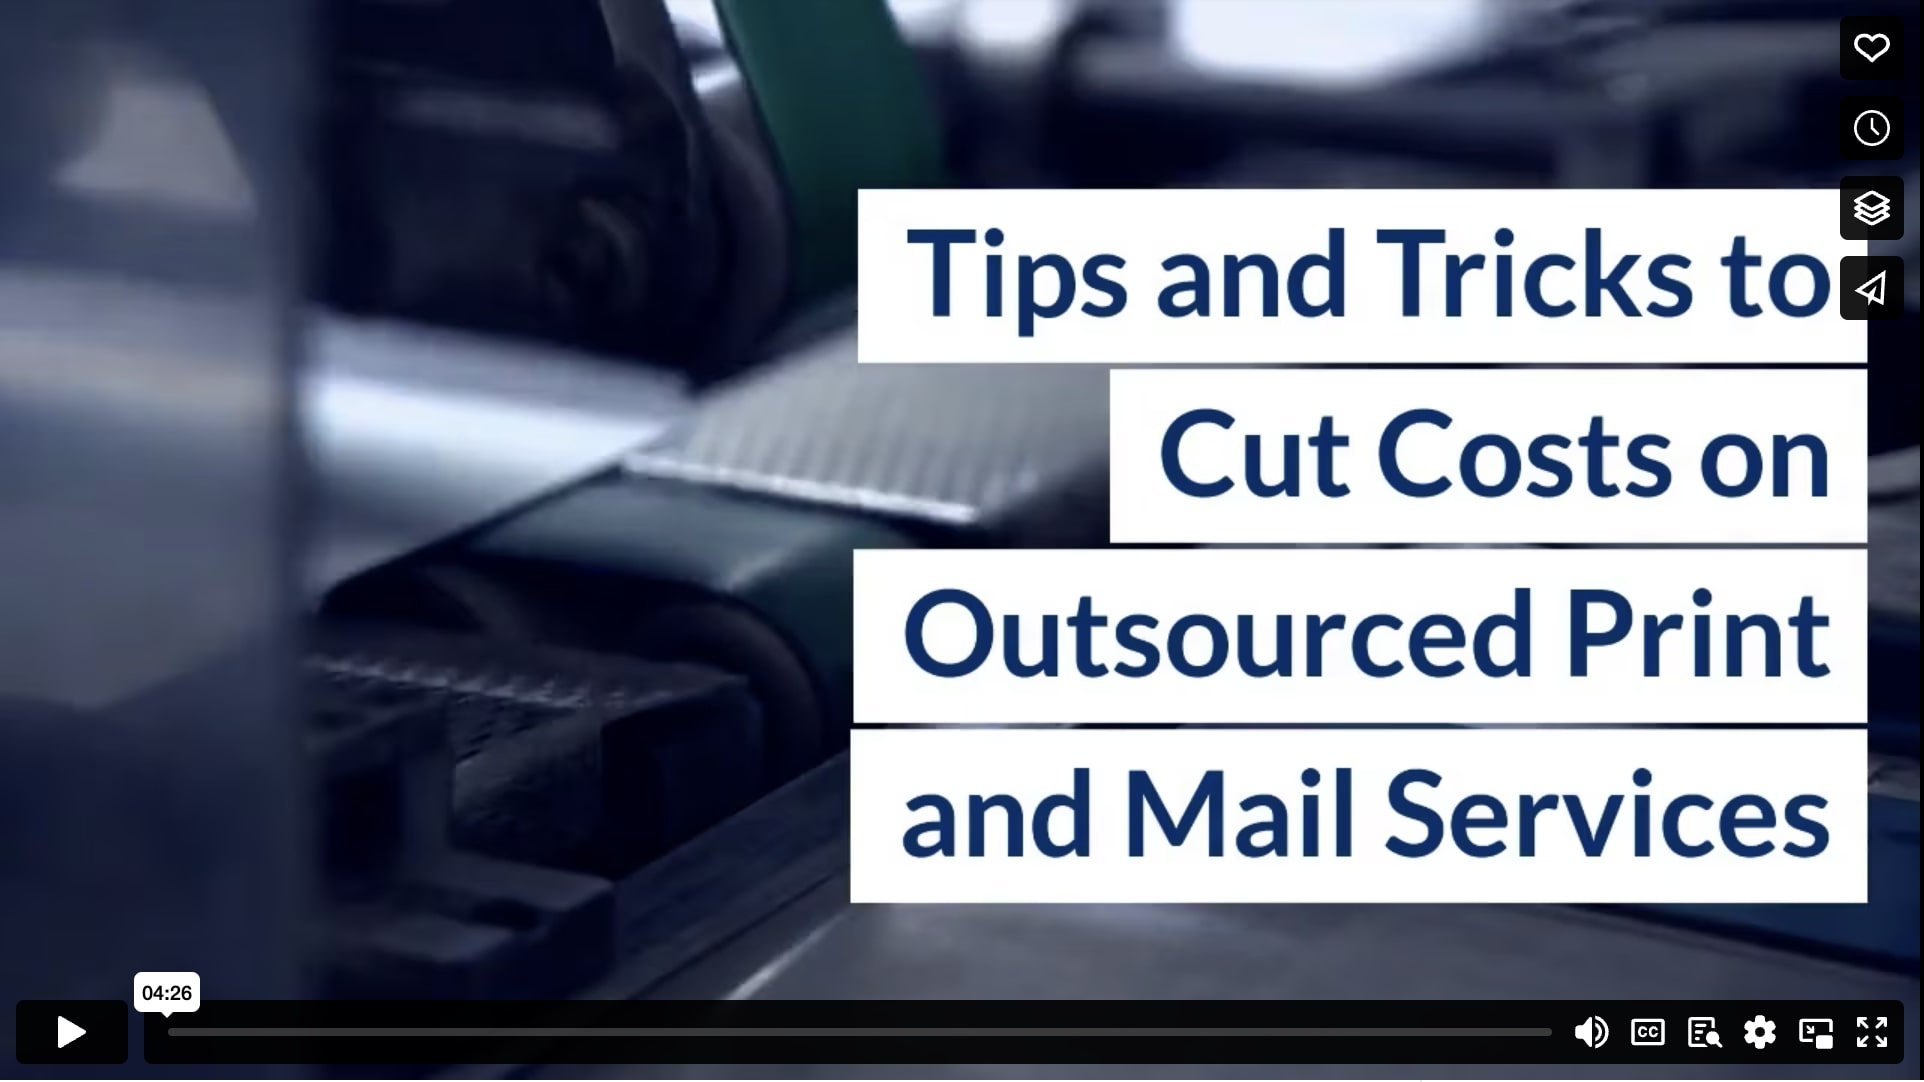 Tips and Tricks to Cut Costs on Outsourced Print and Mail Services